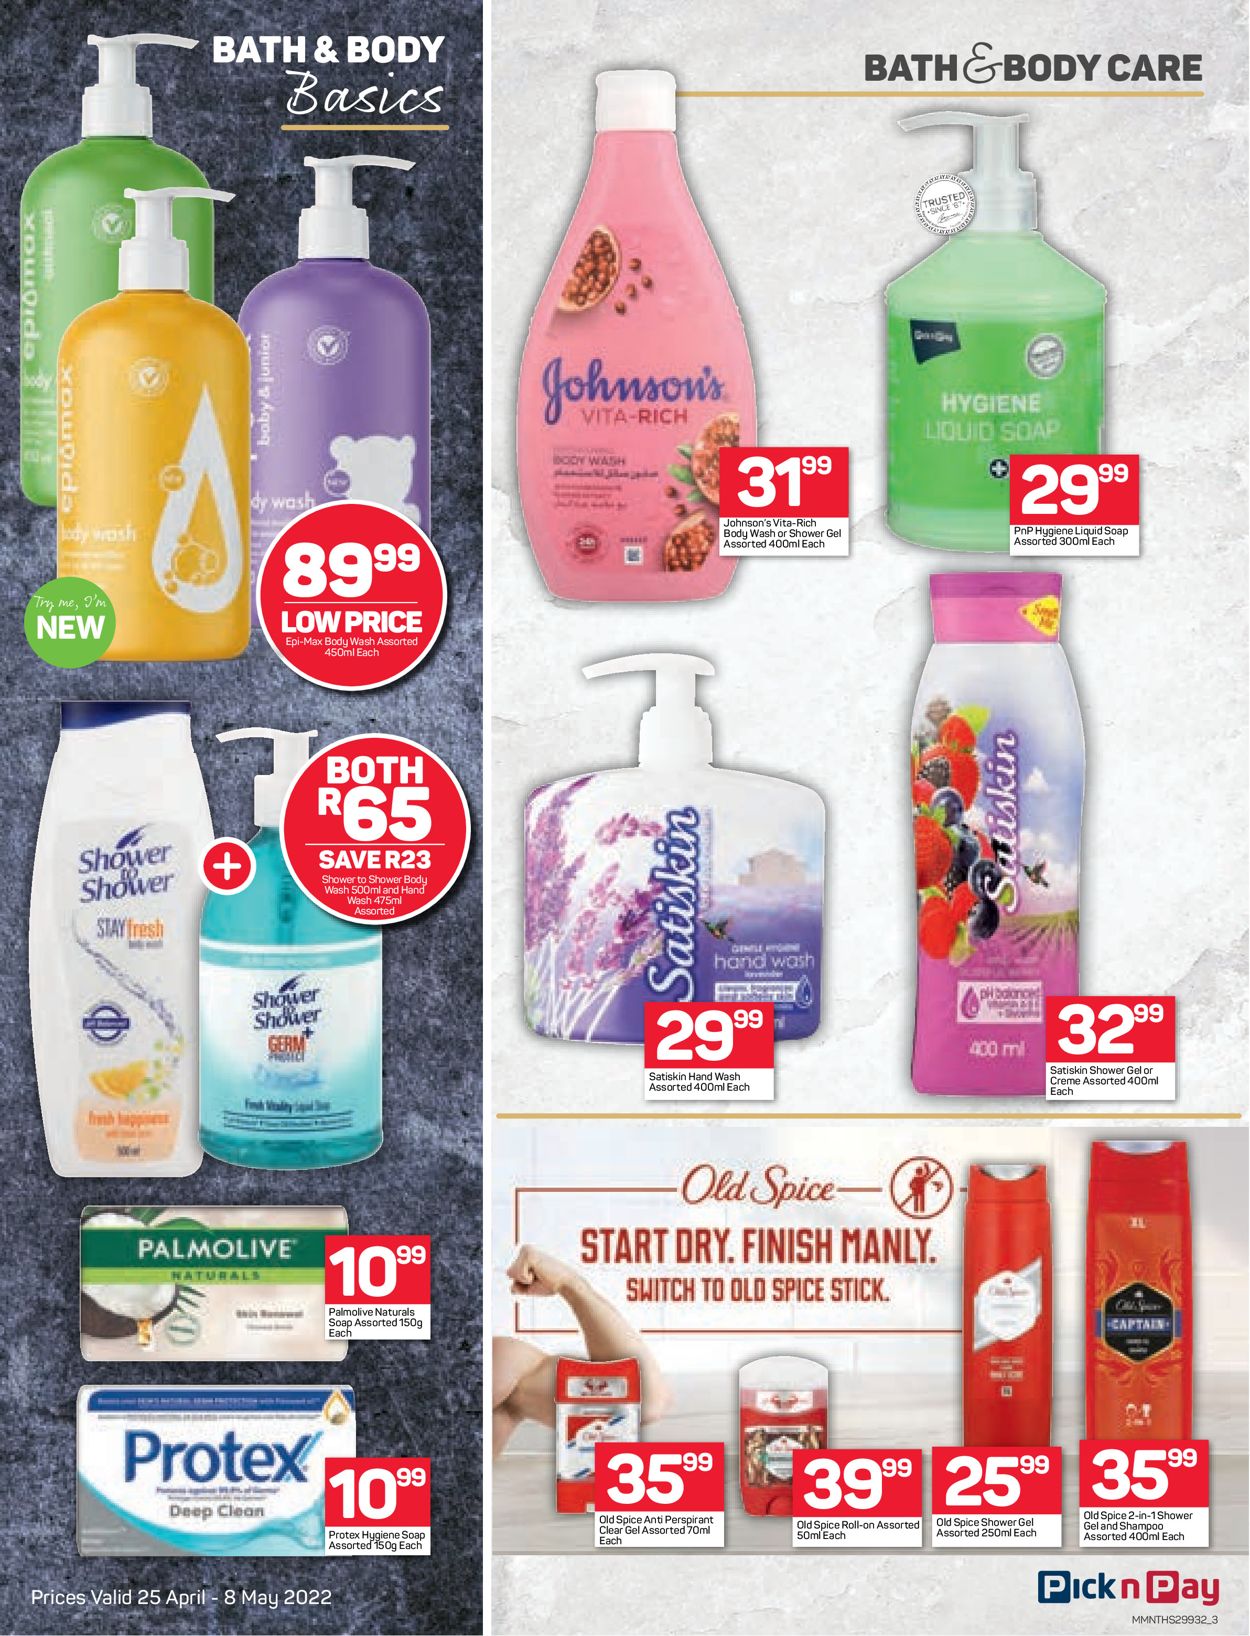 Pick n Pay Catalogue - 2022/04/25-2022/05/08 (Page 3)